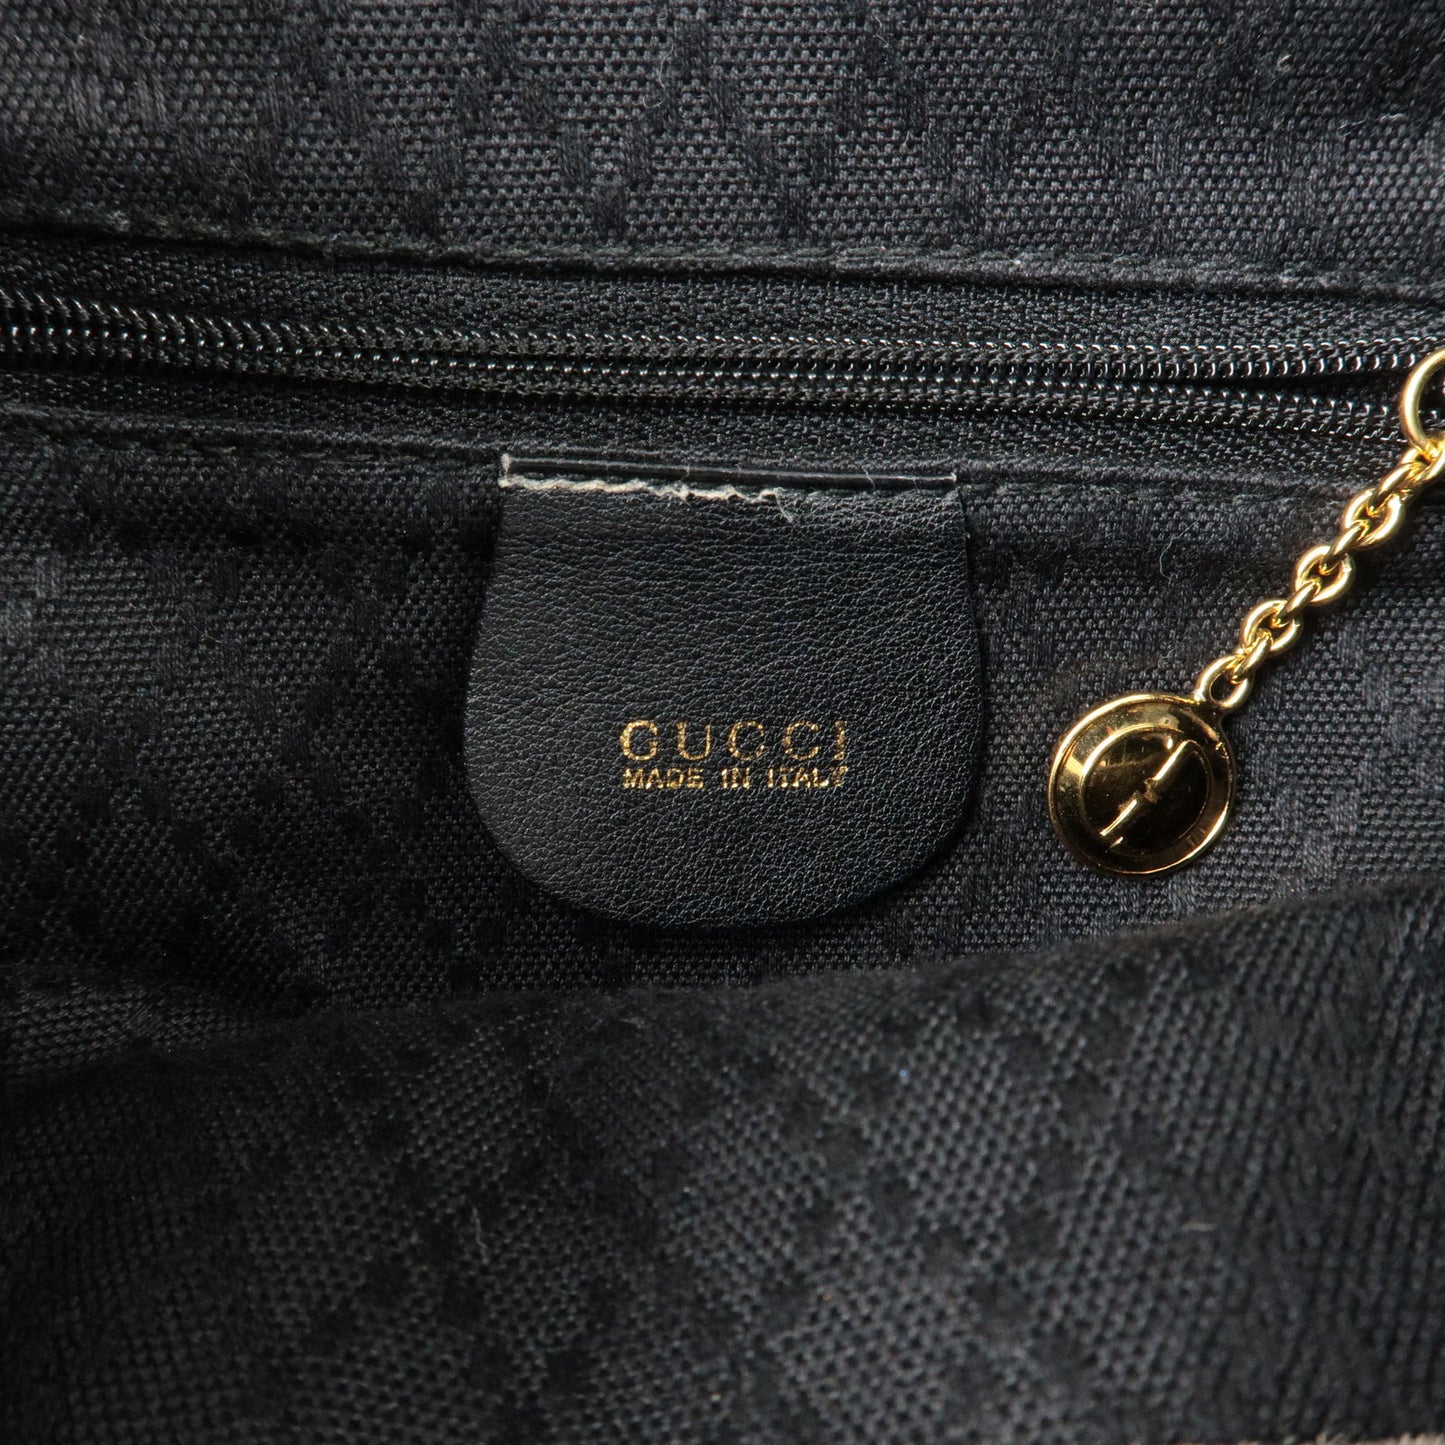 GUCCI Bamboo Leather Ruck Sack Back Pack Black 003.58.0030